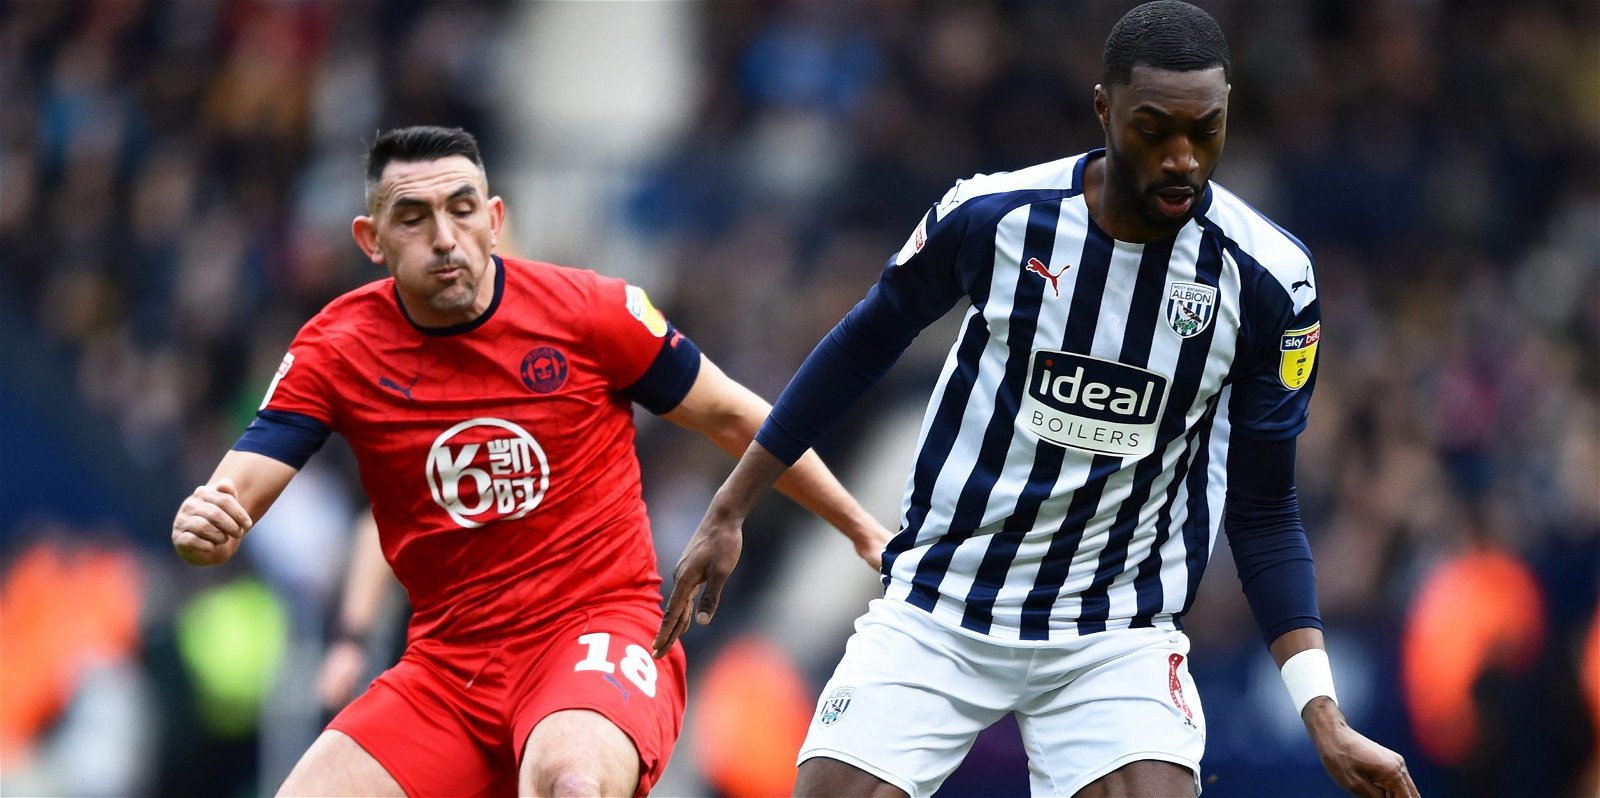 Ajayi, &#8216;I learnt a lot&#8217;- West Brom&#8217;s Ajayi on Arsenal days